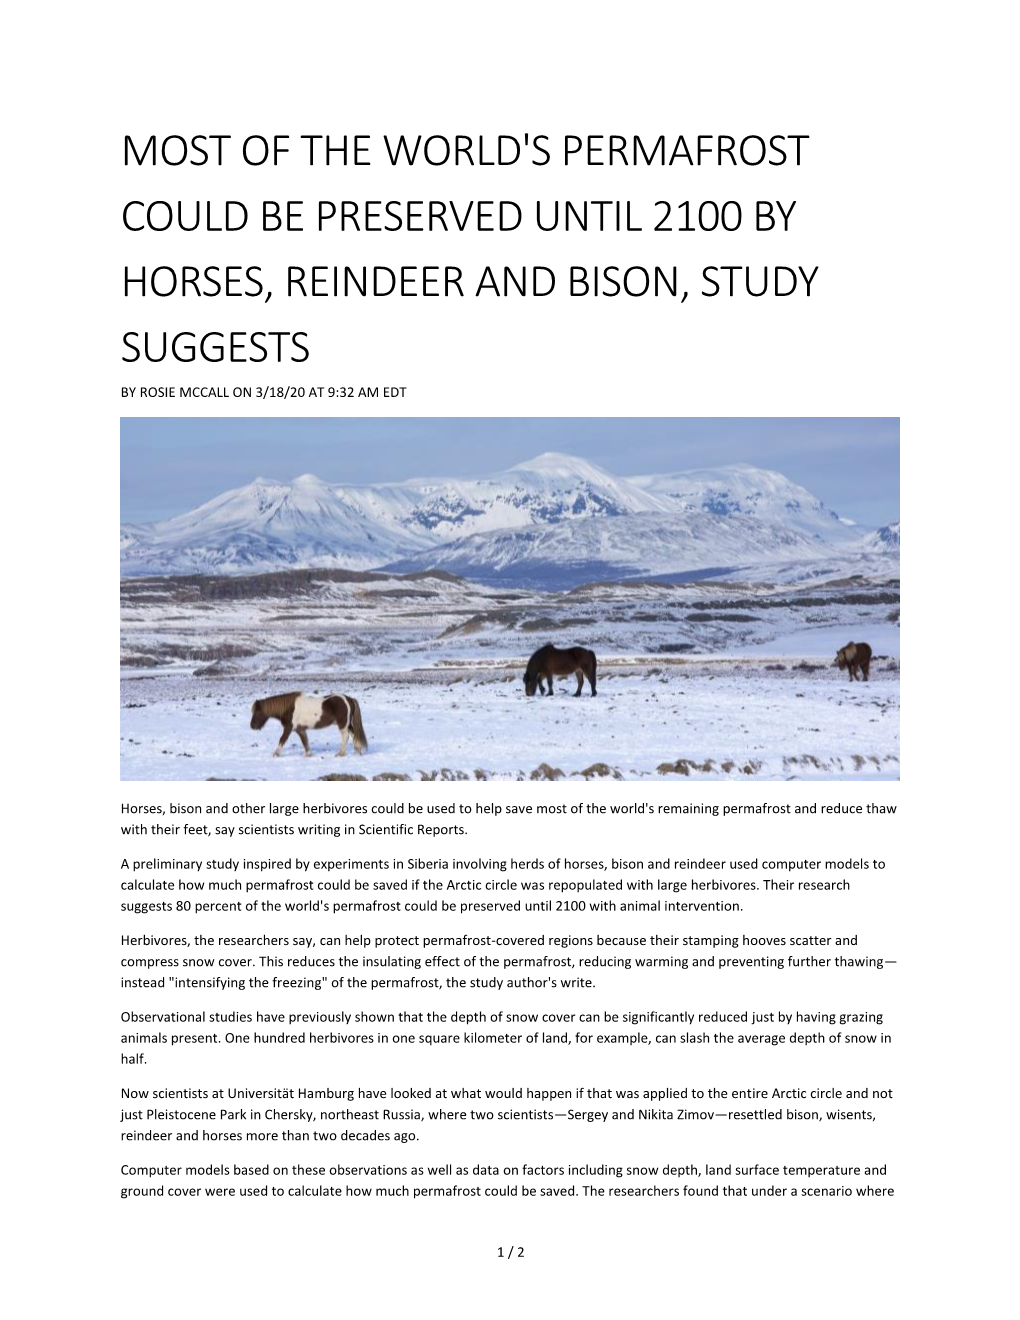 Most of the World's Permafrost Could Be Preserved Until 2100 by Horses, Reindeer and Bison, Study Suggests by Rosie Mccall on 3/18/20 at 9:32 Am Edt